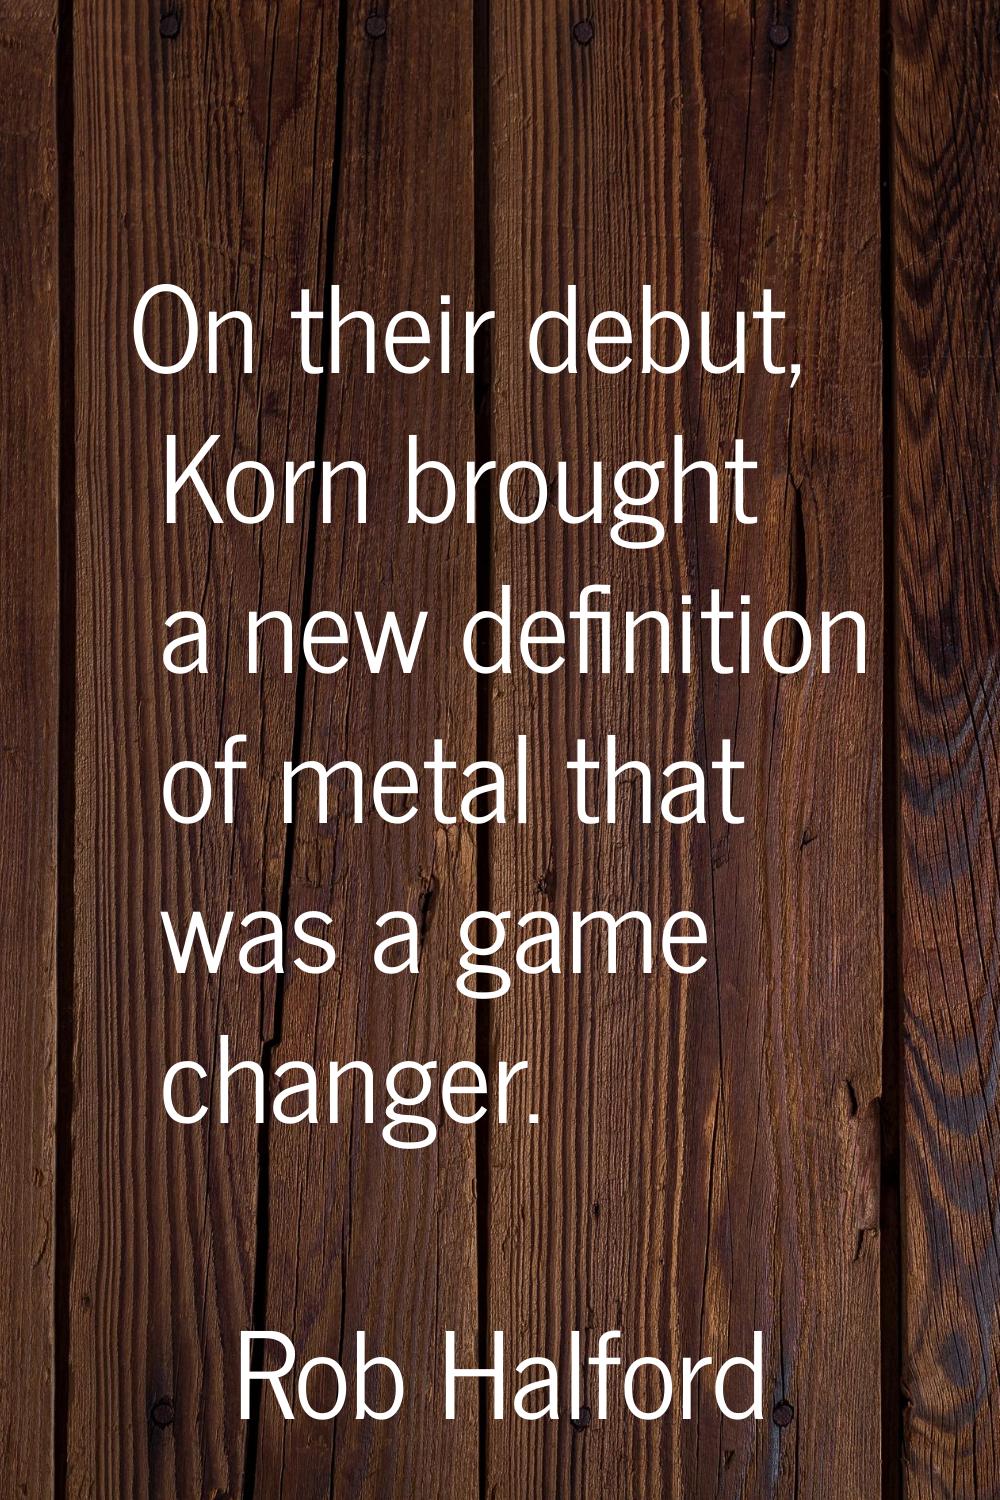 On their debut, Korn brought a new definition of metal that was a game changer.